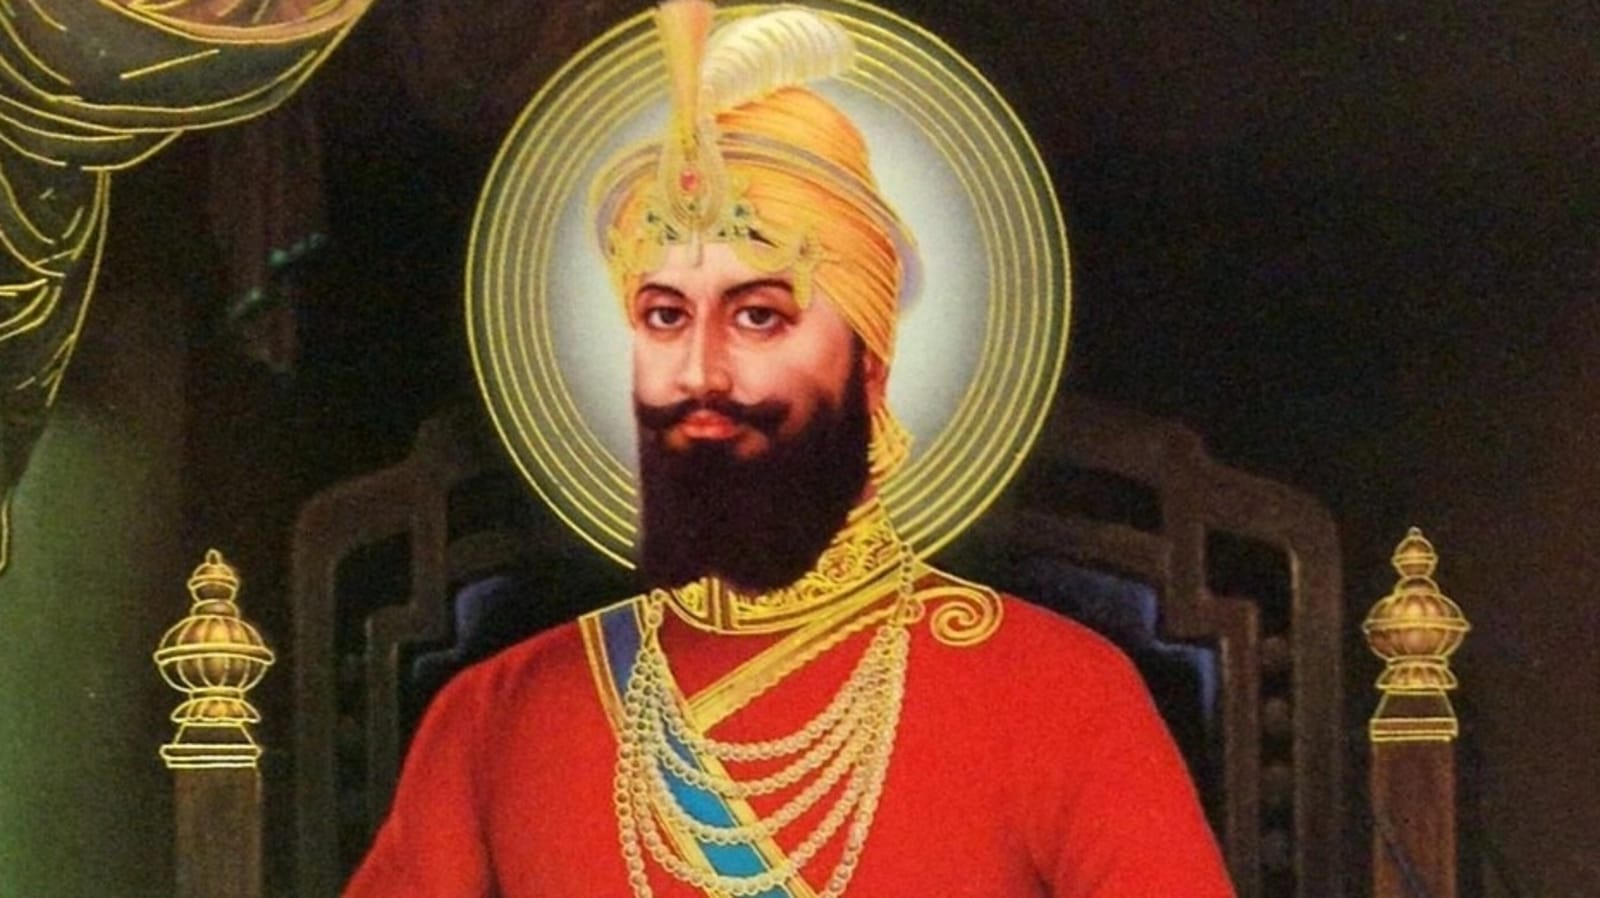 guru-gobind-singh-jayanti-2022-wishes-messages-quotes-to-share-with